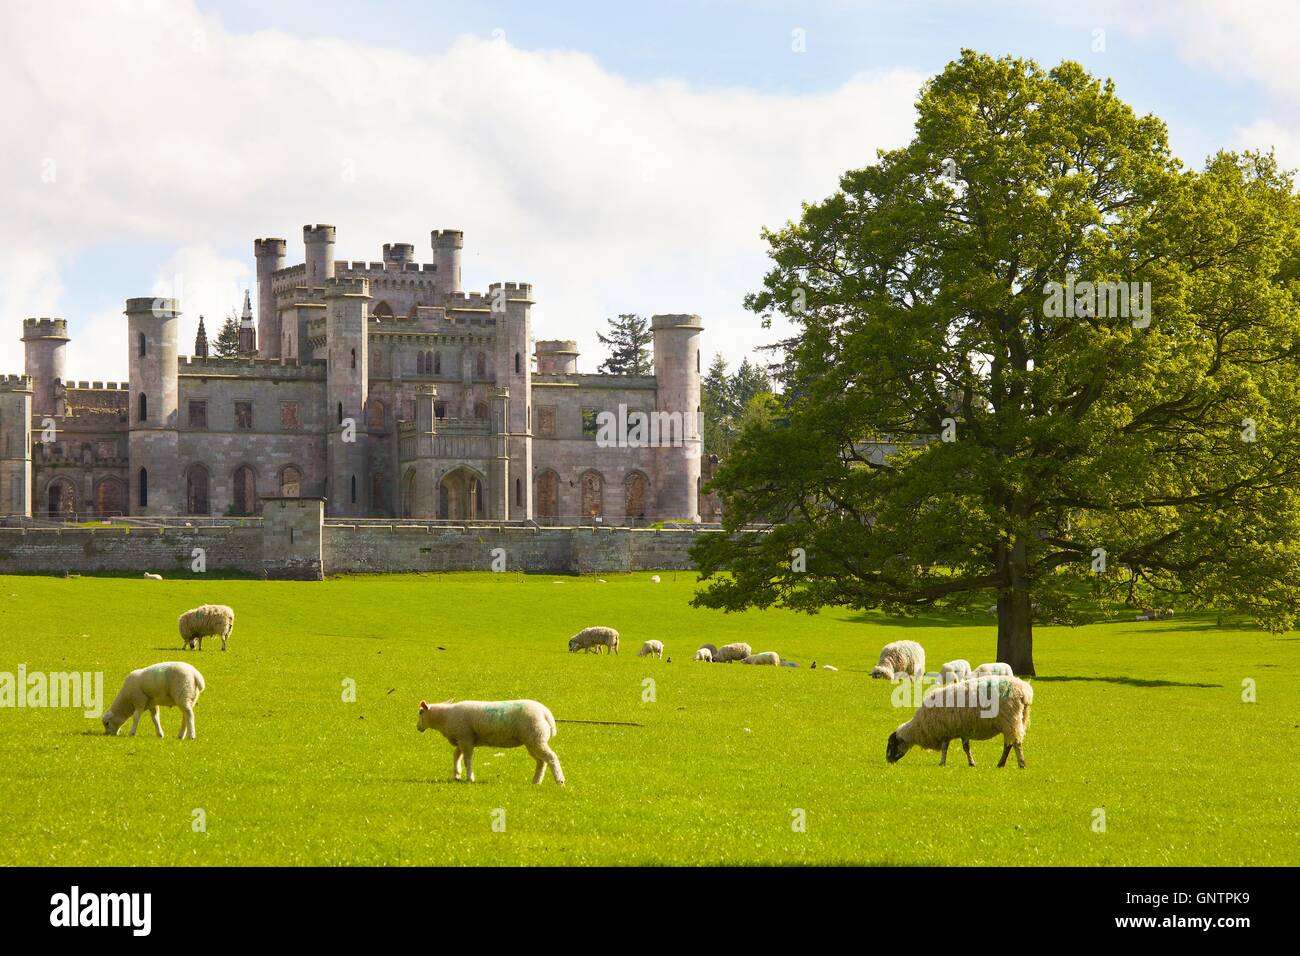 Lowther Castle ruins. Lowther Castle ruins. Sheep grazing in park land in front of ruin. Lowther, Askham, Penrith, Cumbria, UK. Stock Photo